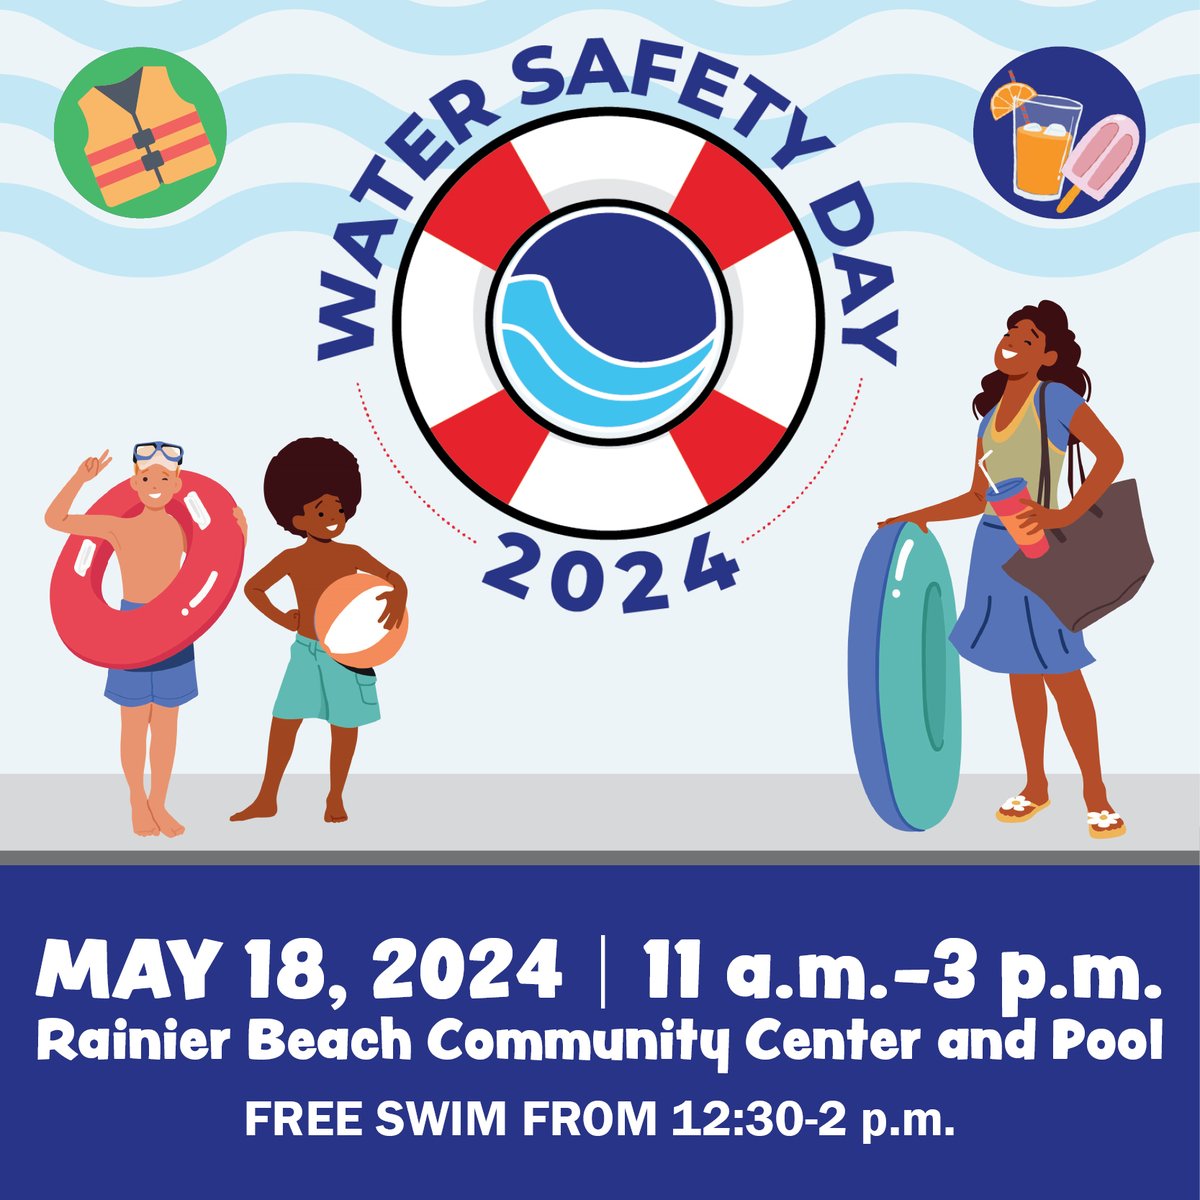 Join us for a day of FREE fun and activities centered around water safety! Saturday, May 18 from 11am to 3pm at Rainier Beach Community Center and Pool. A FREE family swim is available from 12:30 to 2pm. #WaterSafetyDay #SwimSeattle parkways.seattle.gov/2024/05/03/sea…